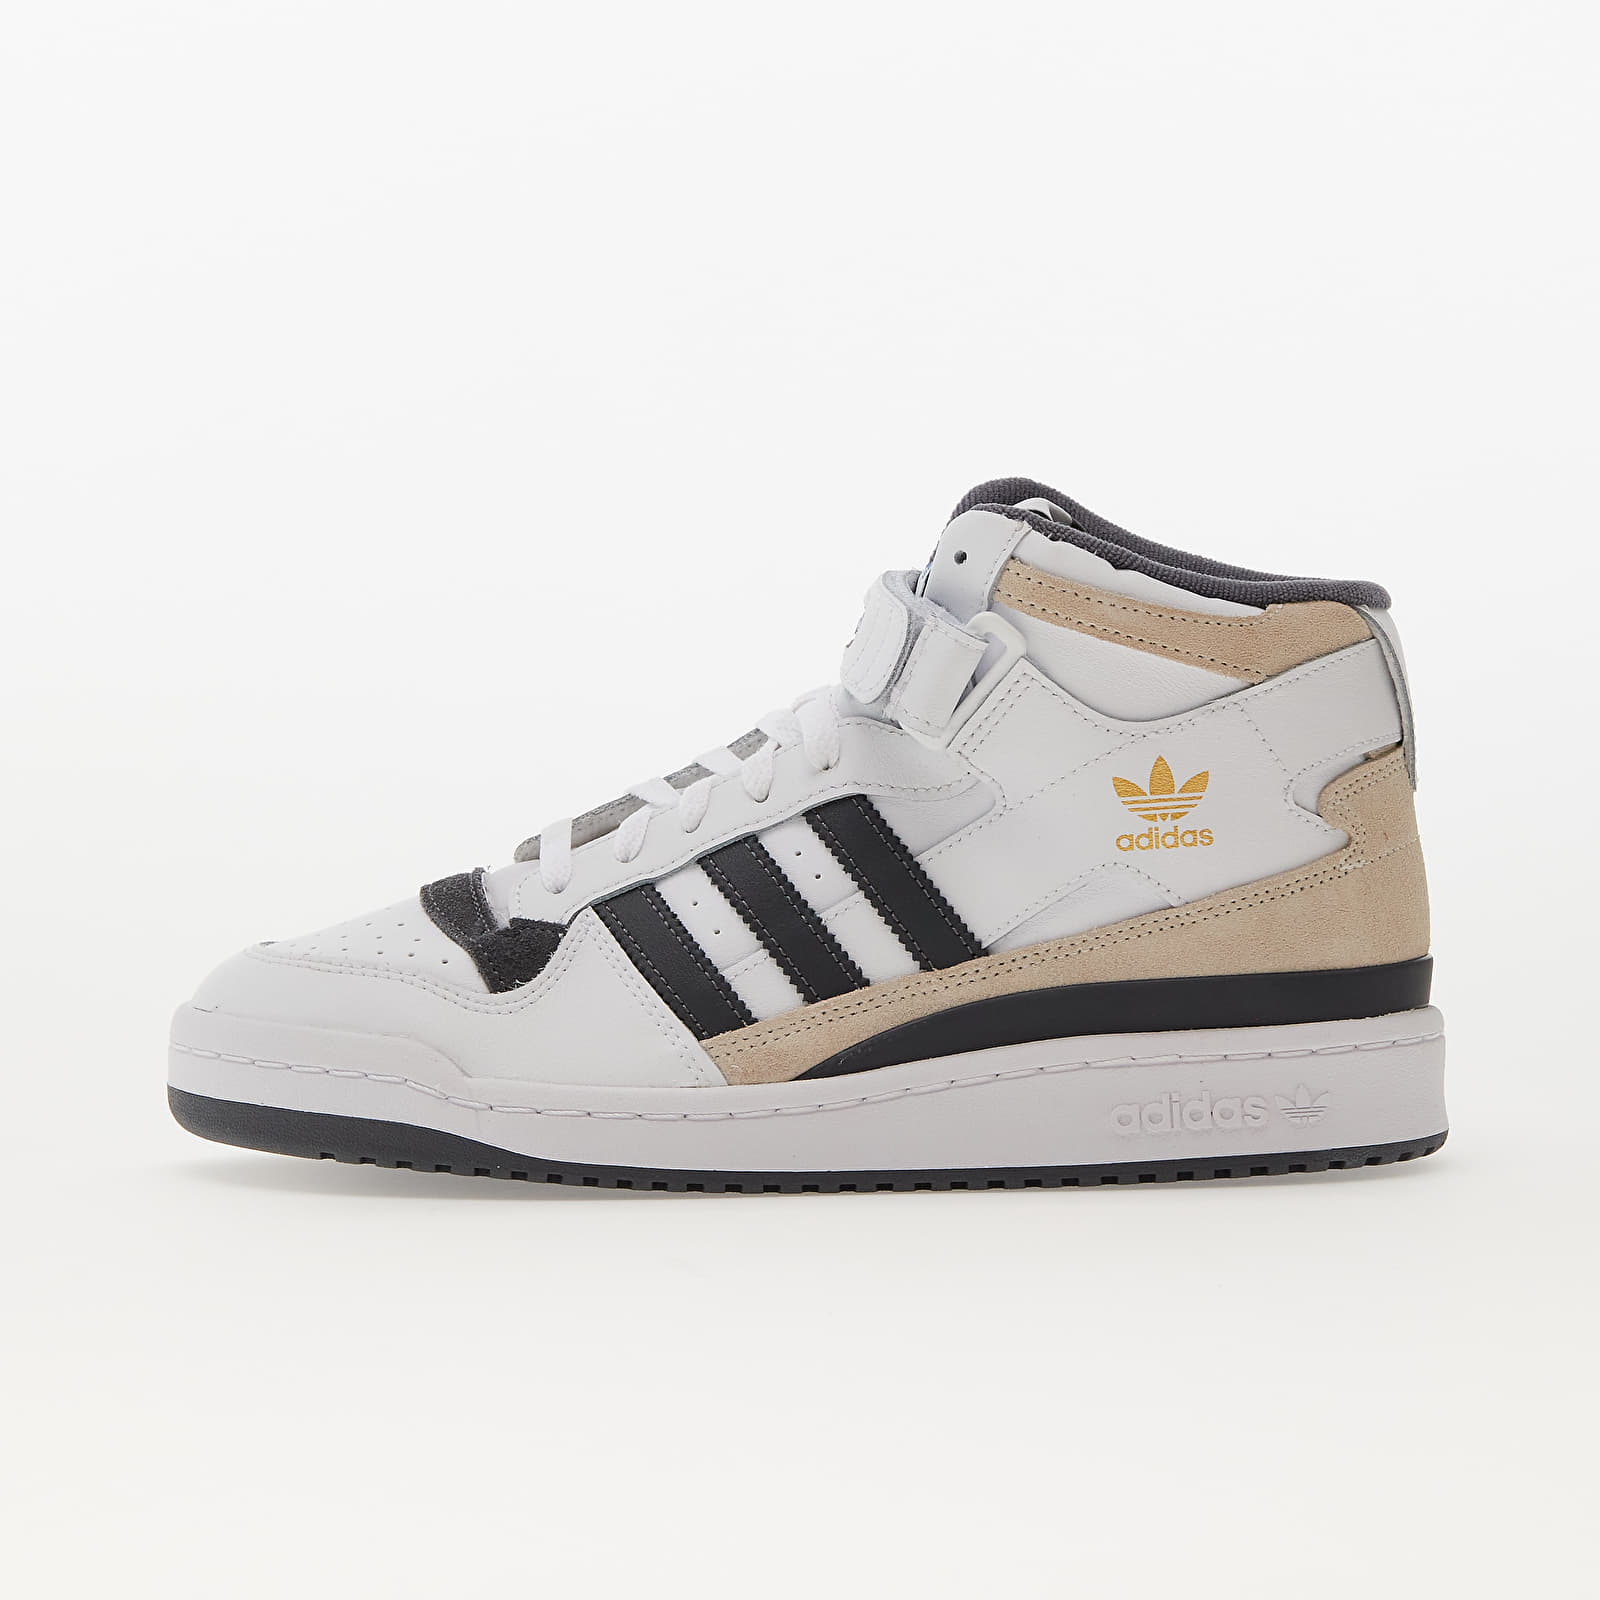 Men's shoes adidas Forum Mid Ftw White/ Grey Five/ Gold Metalic